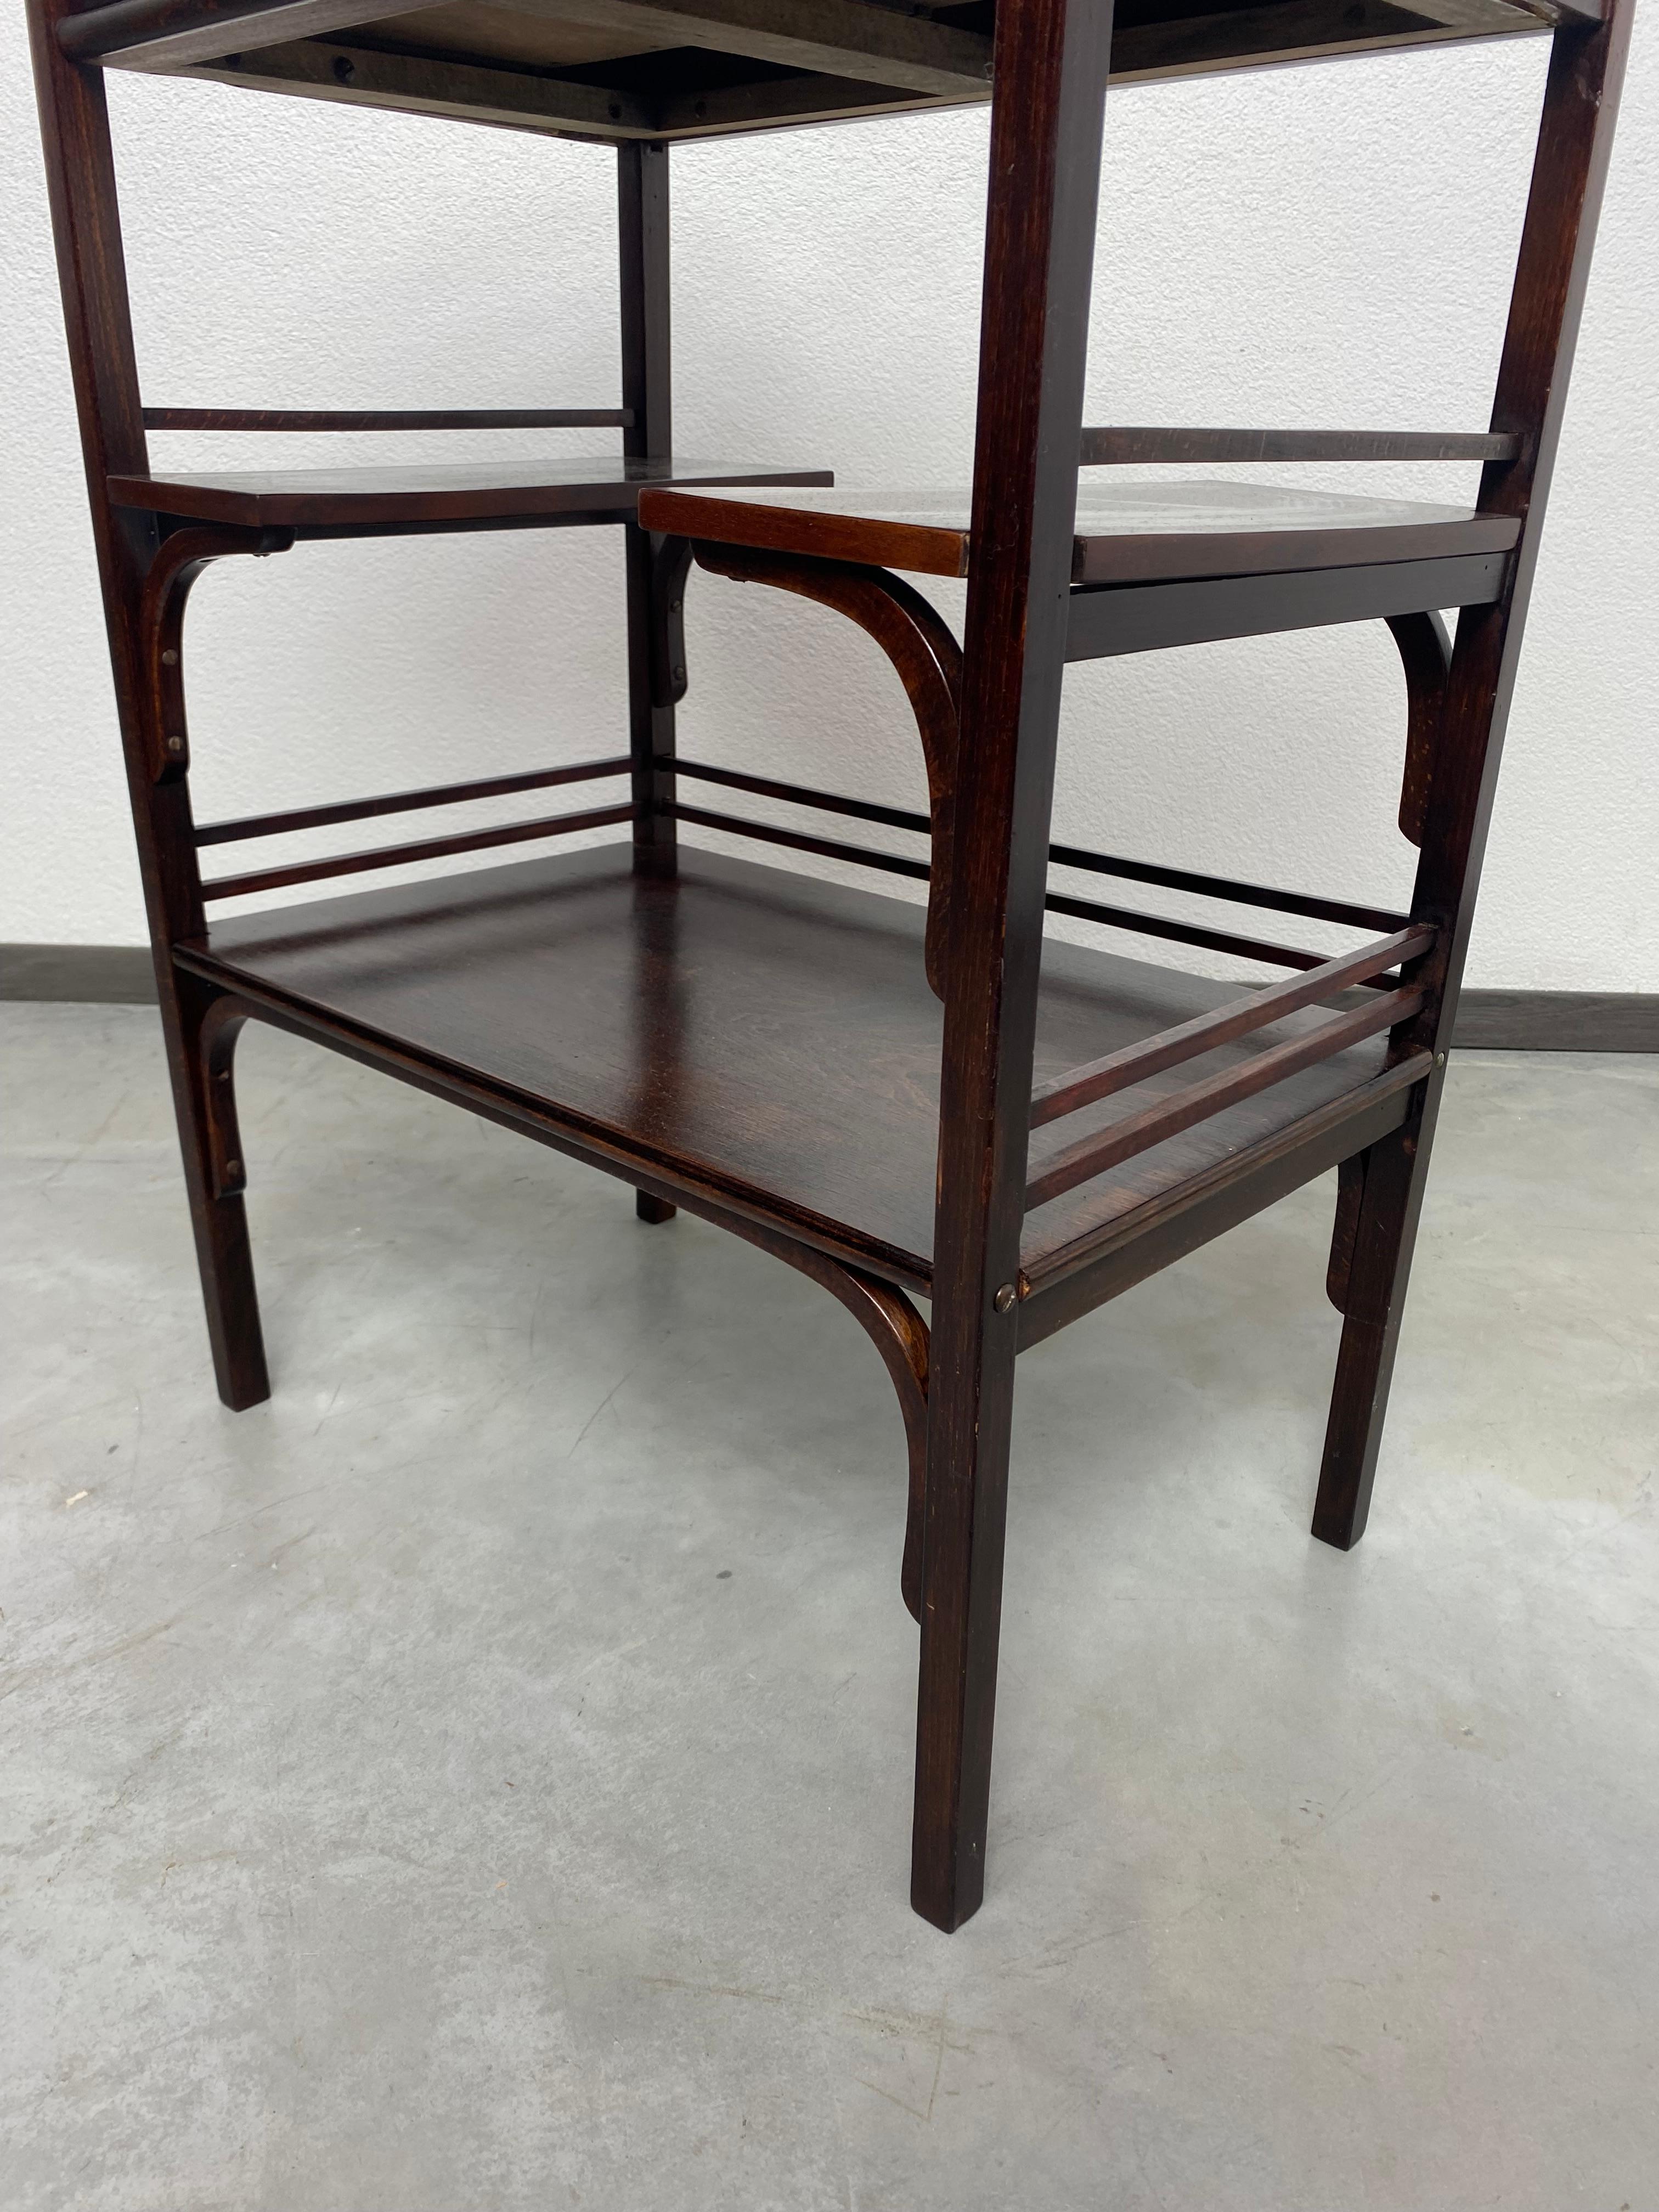 Austrian Vienna secession etagere atr. to Koloman Moser and Otto Wagner ex. by J&J Kohn For Sale